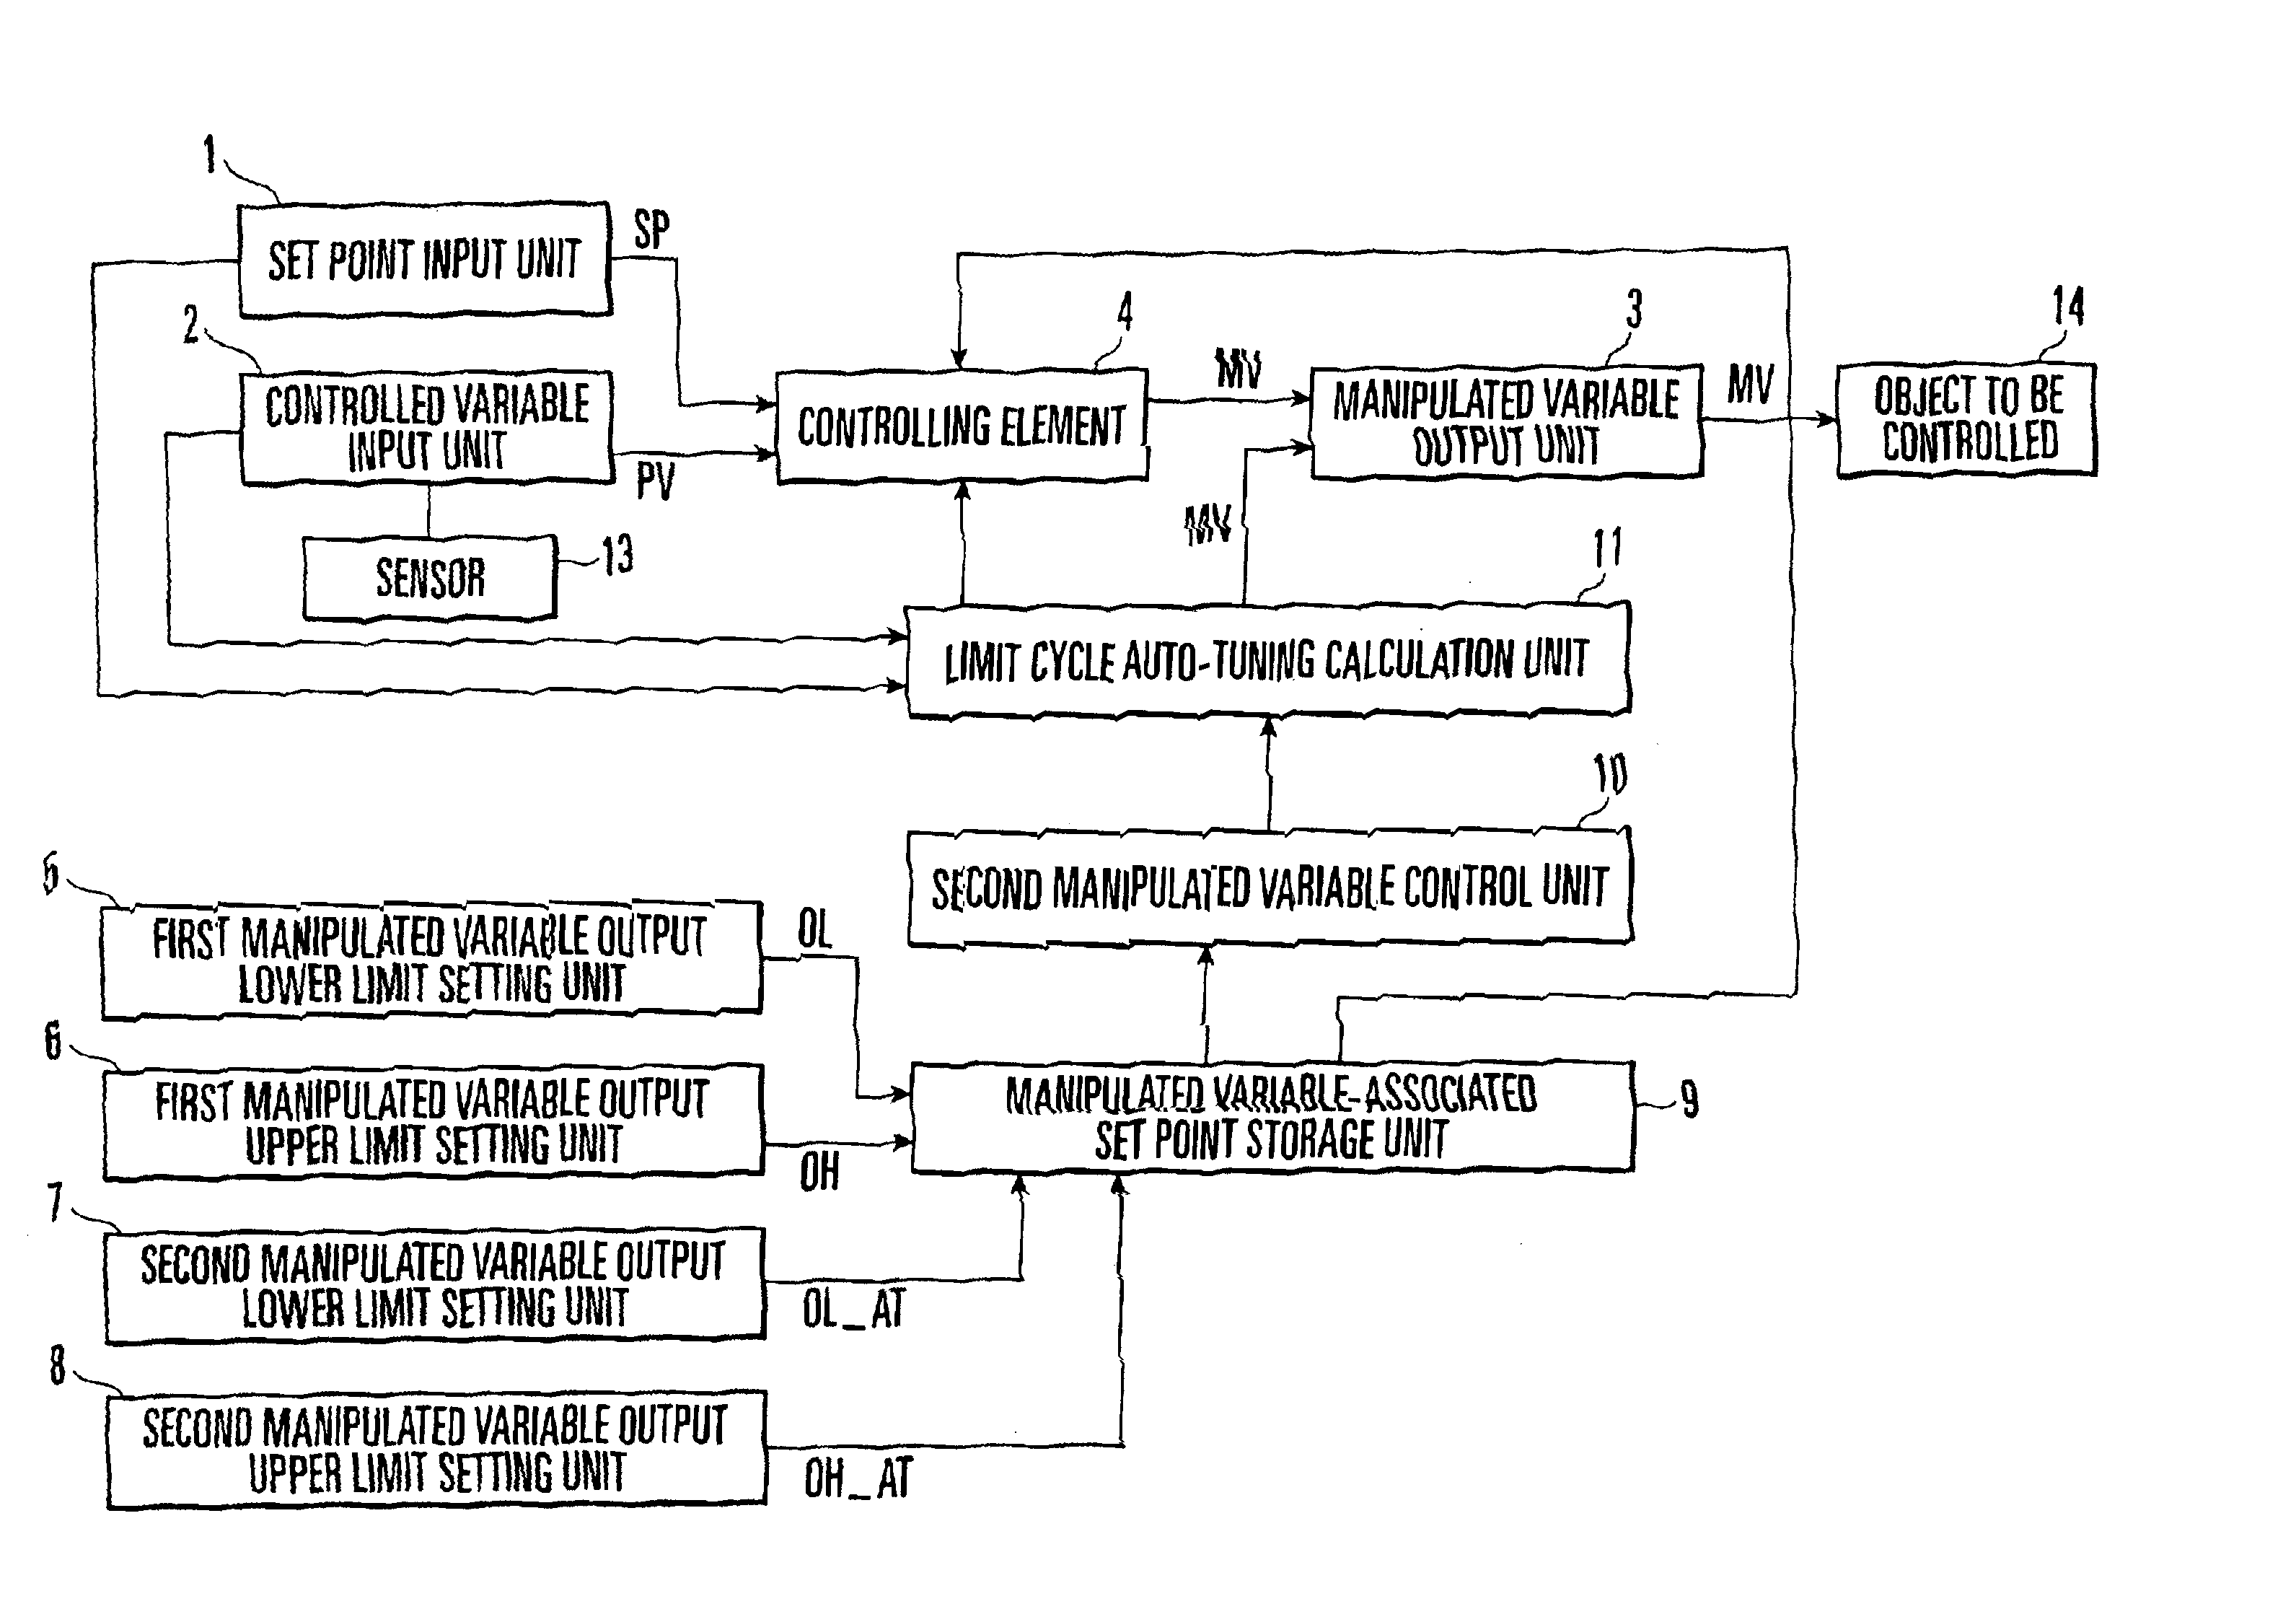 Control apparatus having a limit cycle auto-tuning function